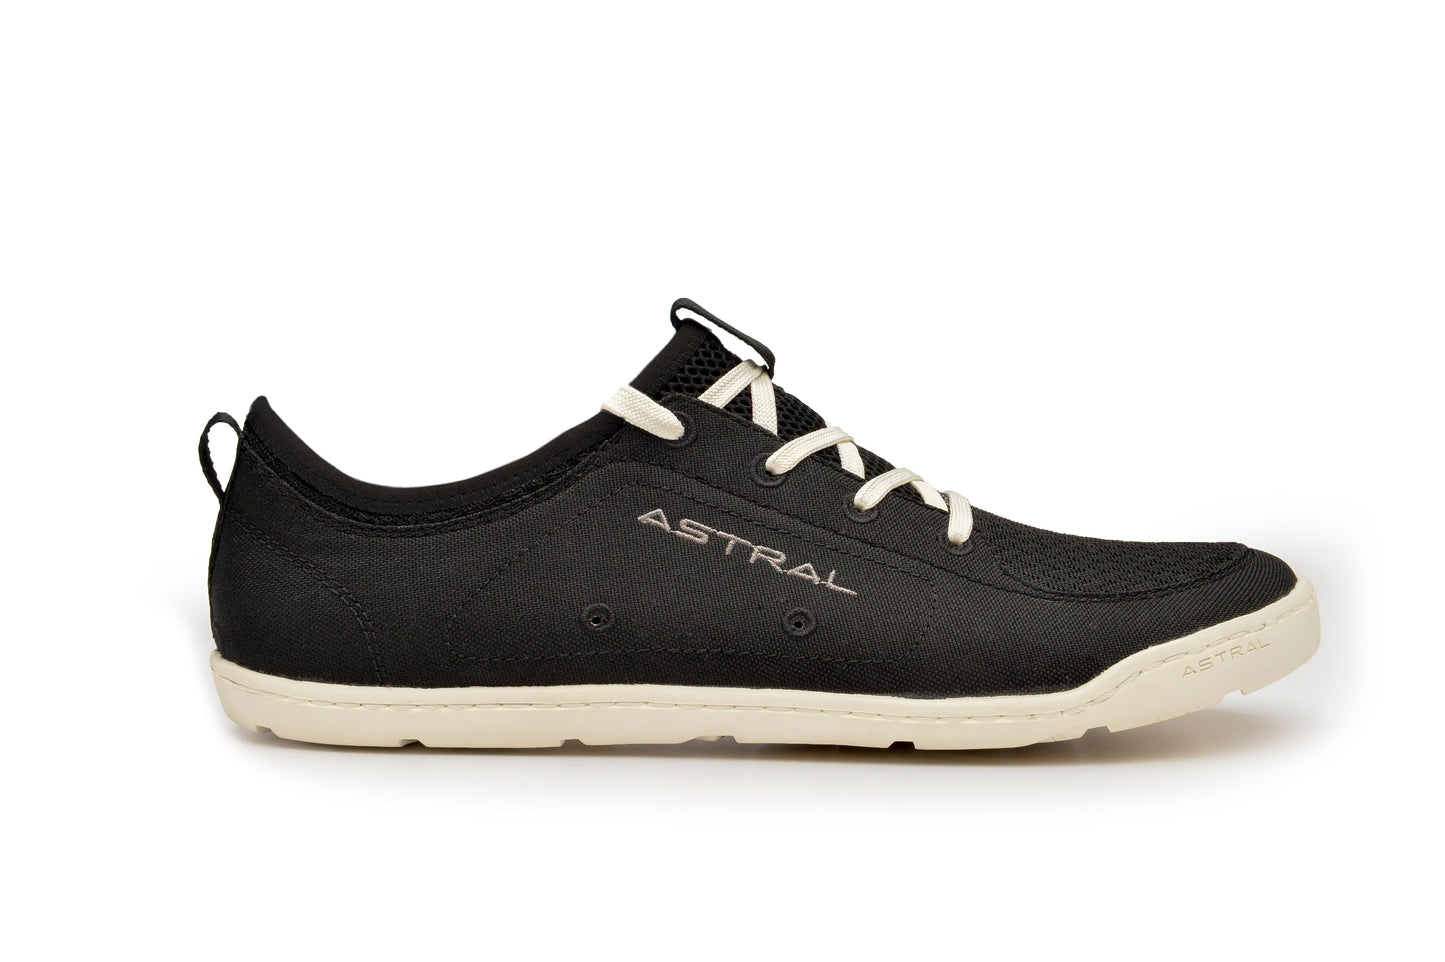 Featuring the Loyak - Youth men's footwear, women's footwear manufactured by Astral shown here from one angle.